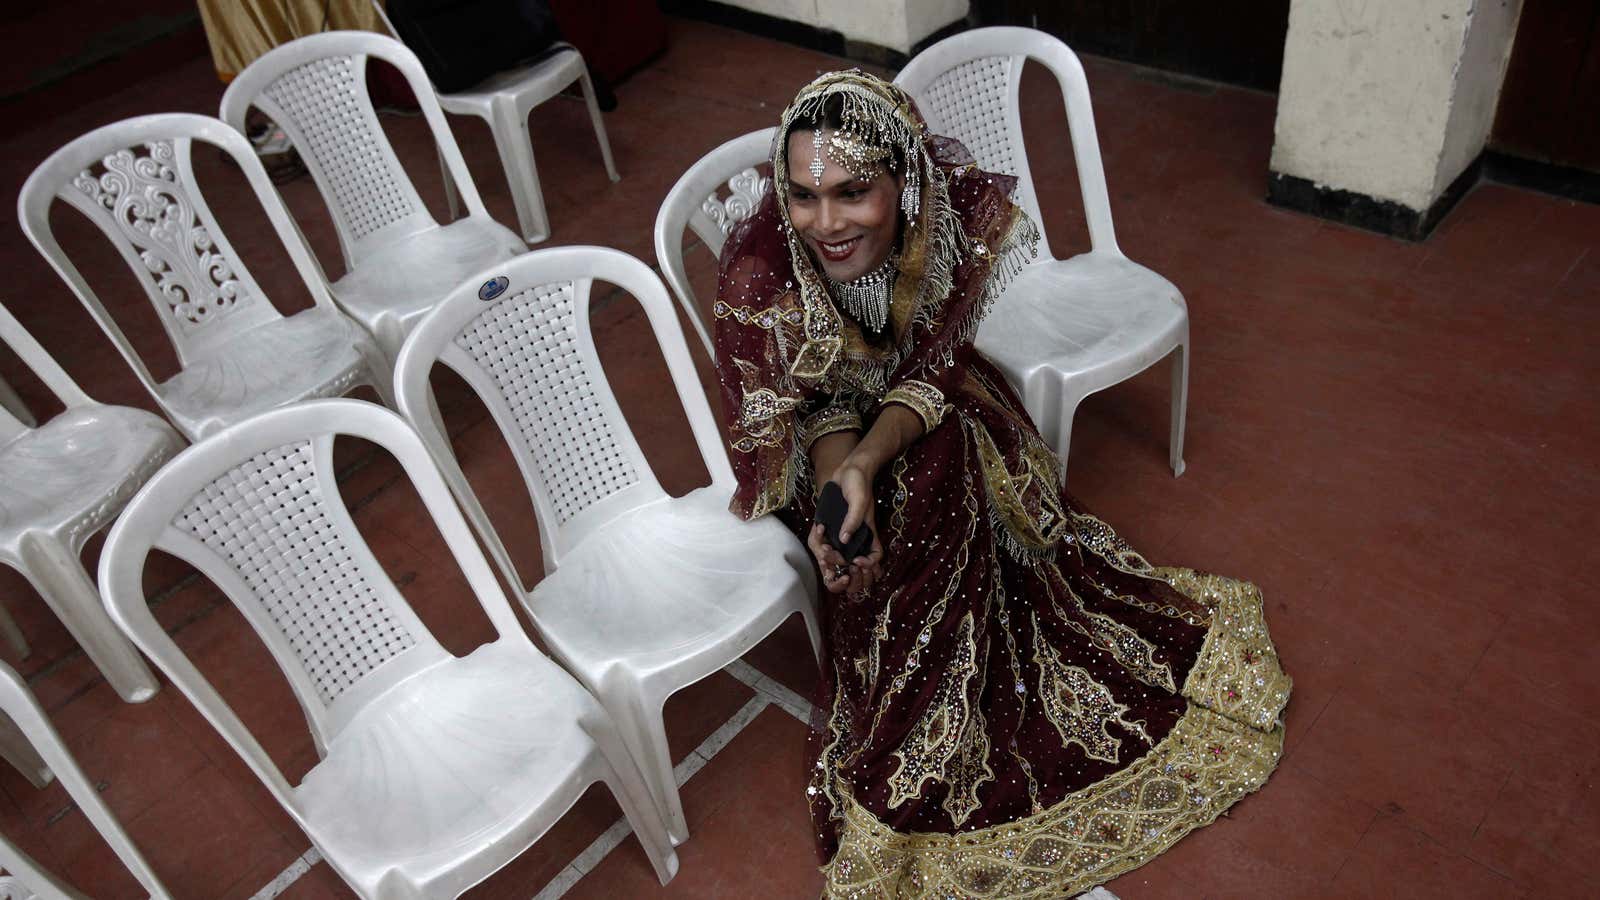 A hijra waits for her dance at a national hijra festival in New Delhi, India.